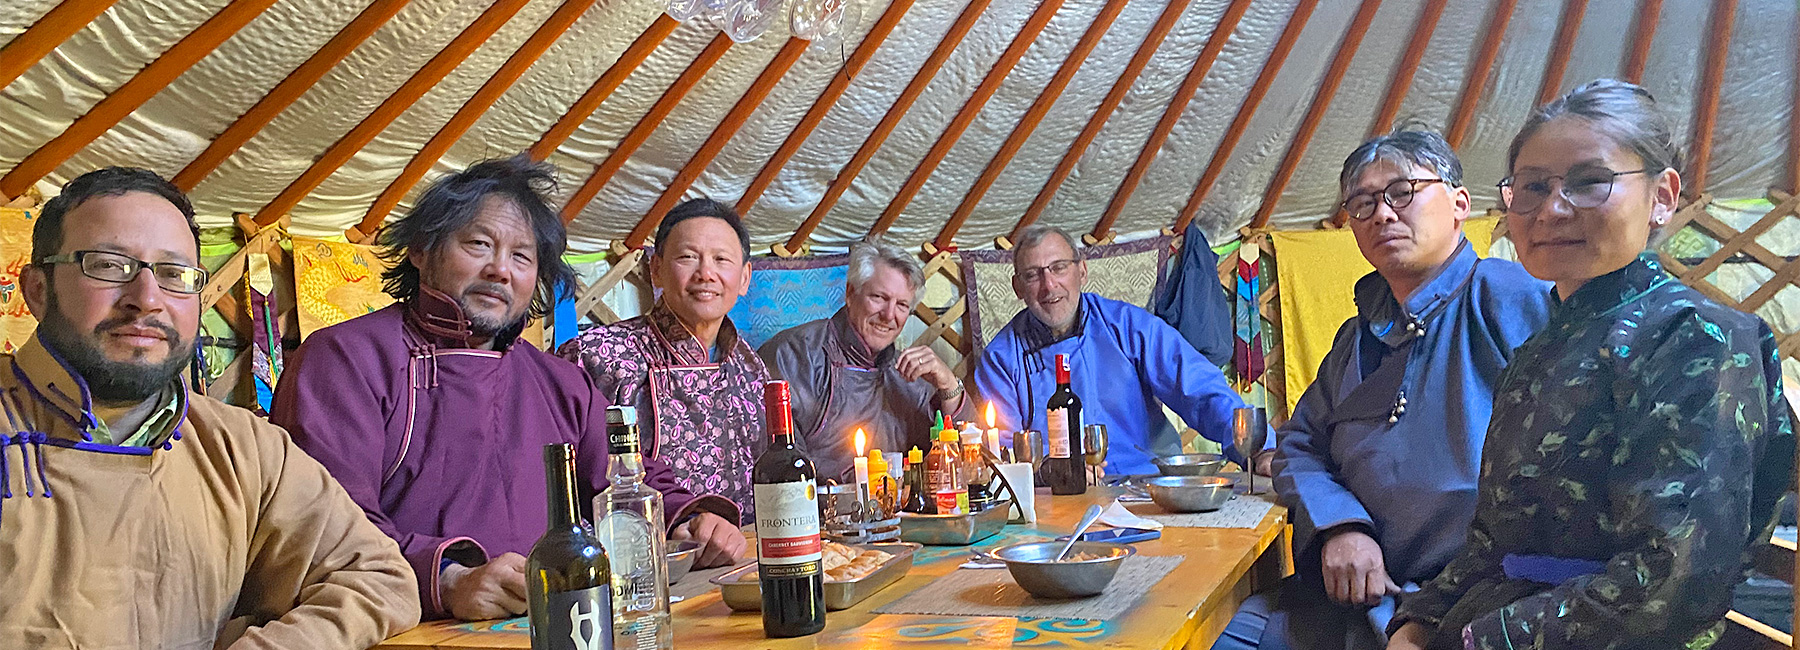 Erik Argotti and his crew on a hosted trip to Mongolia